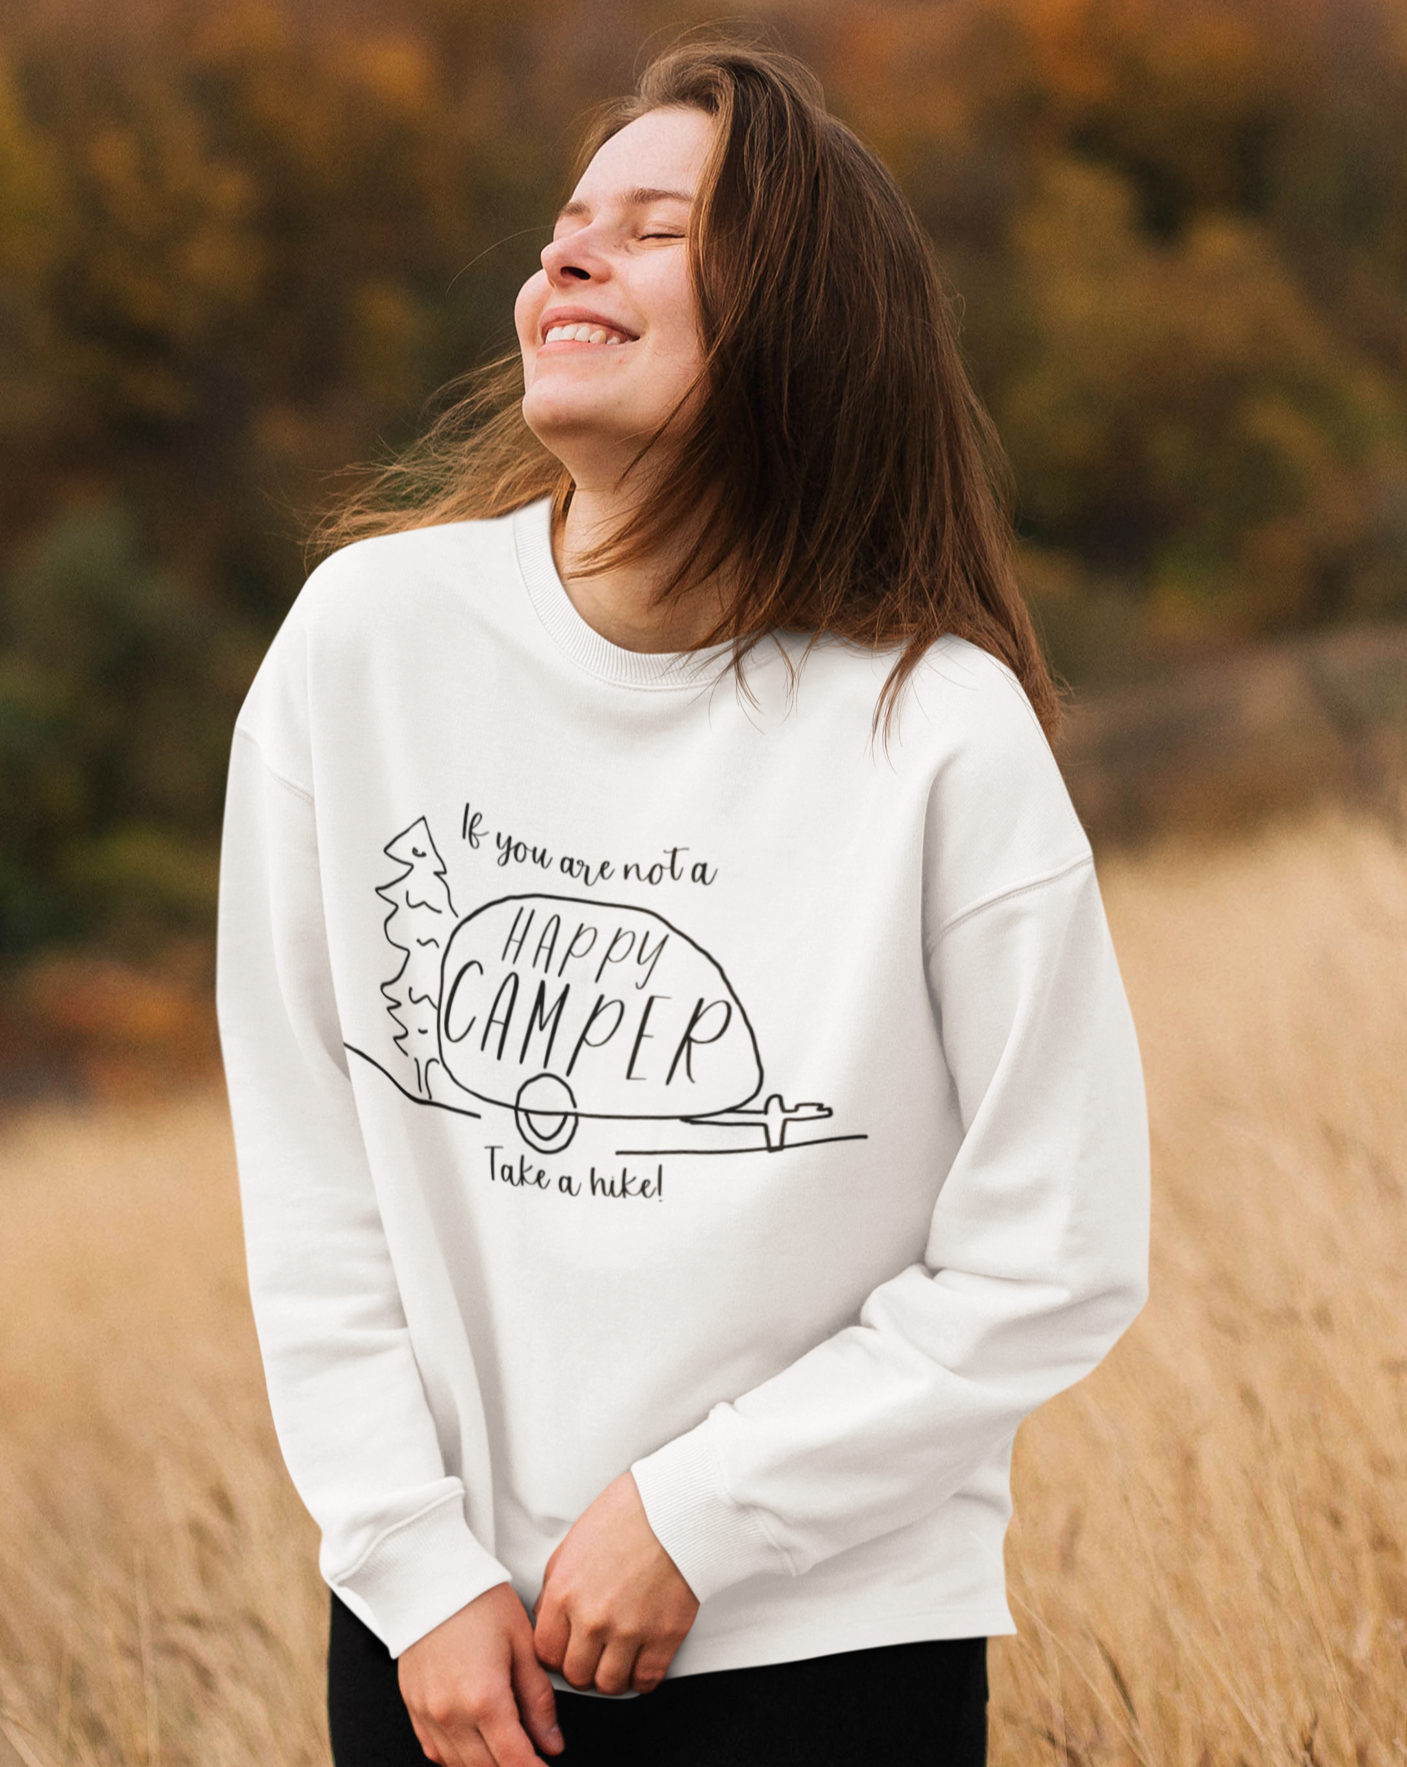 If you are not a HAPPY CAMPER, take a hike! This cozy crewneck sweatshirt is perfect for your camping and hiking adventures.  Stay warm out on the trail while showing off your sense of humor with this funny crew.  Also makes a great gift for that outdoorsy friend in your life.